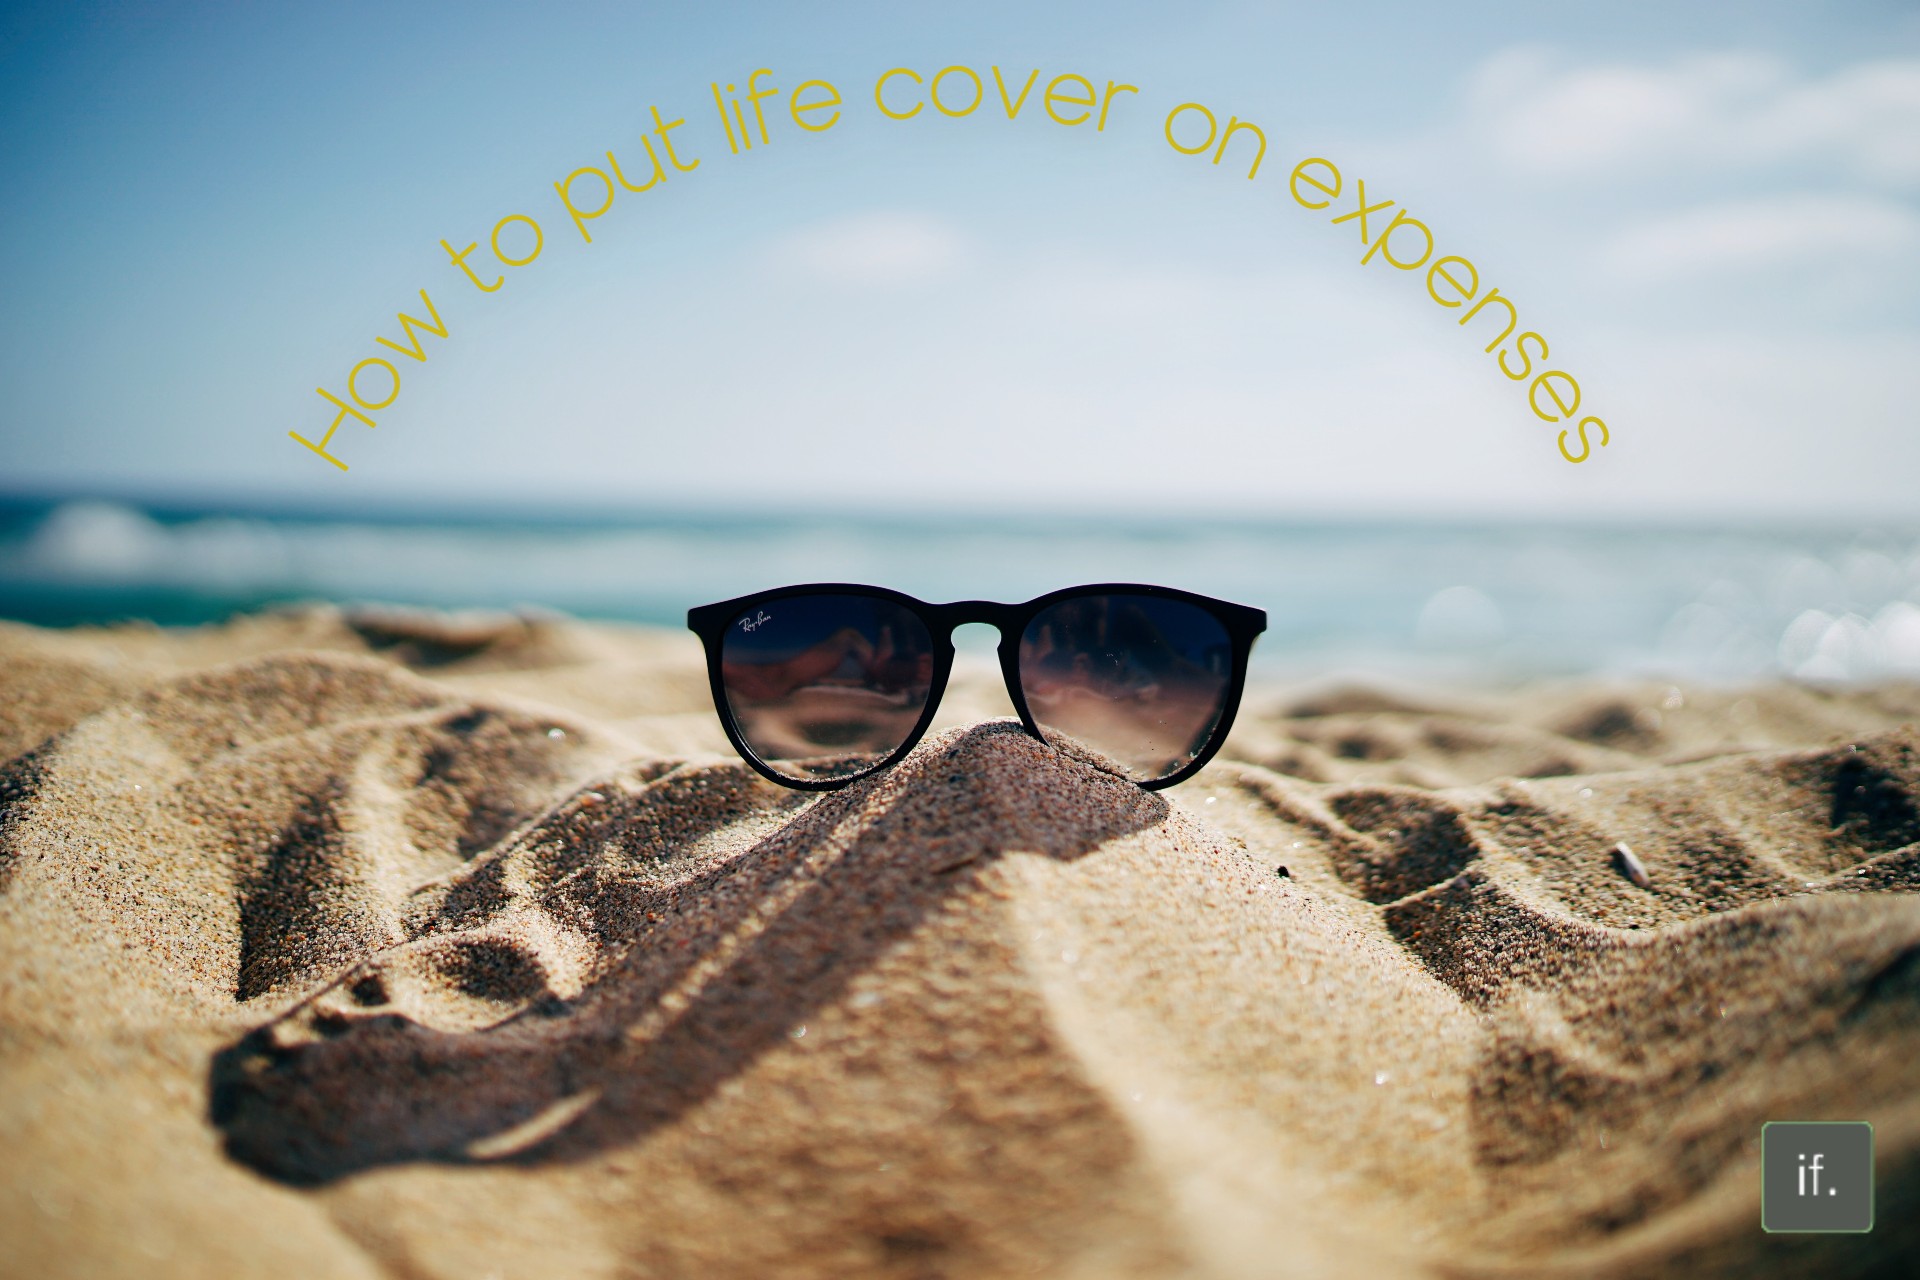 How to put life cover on expenses